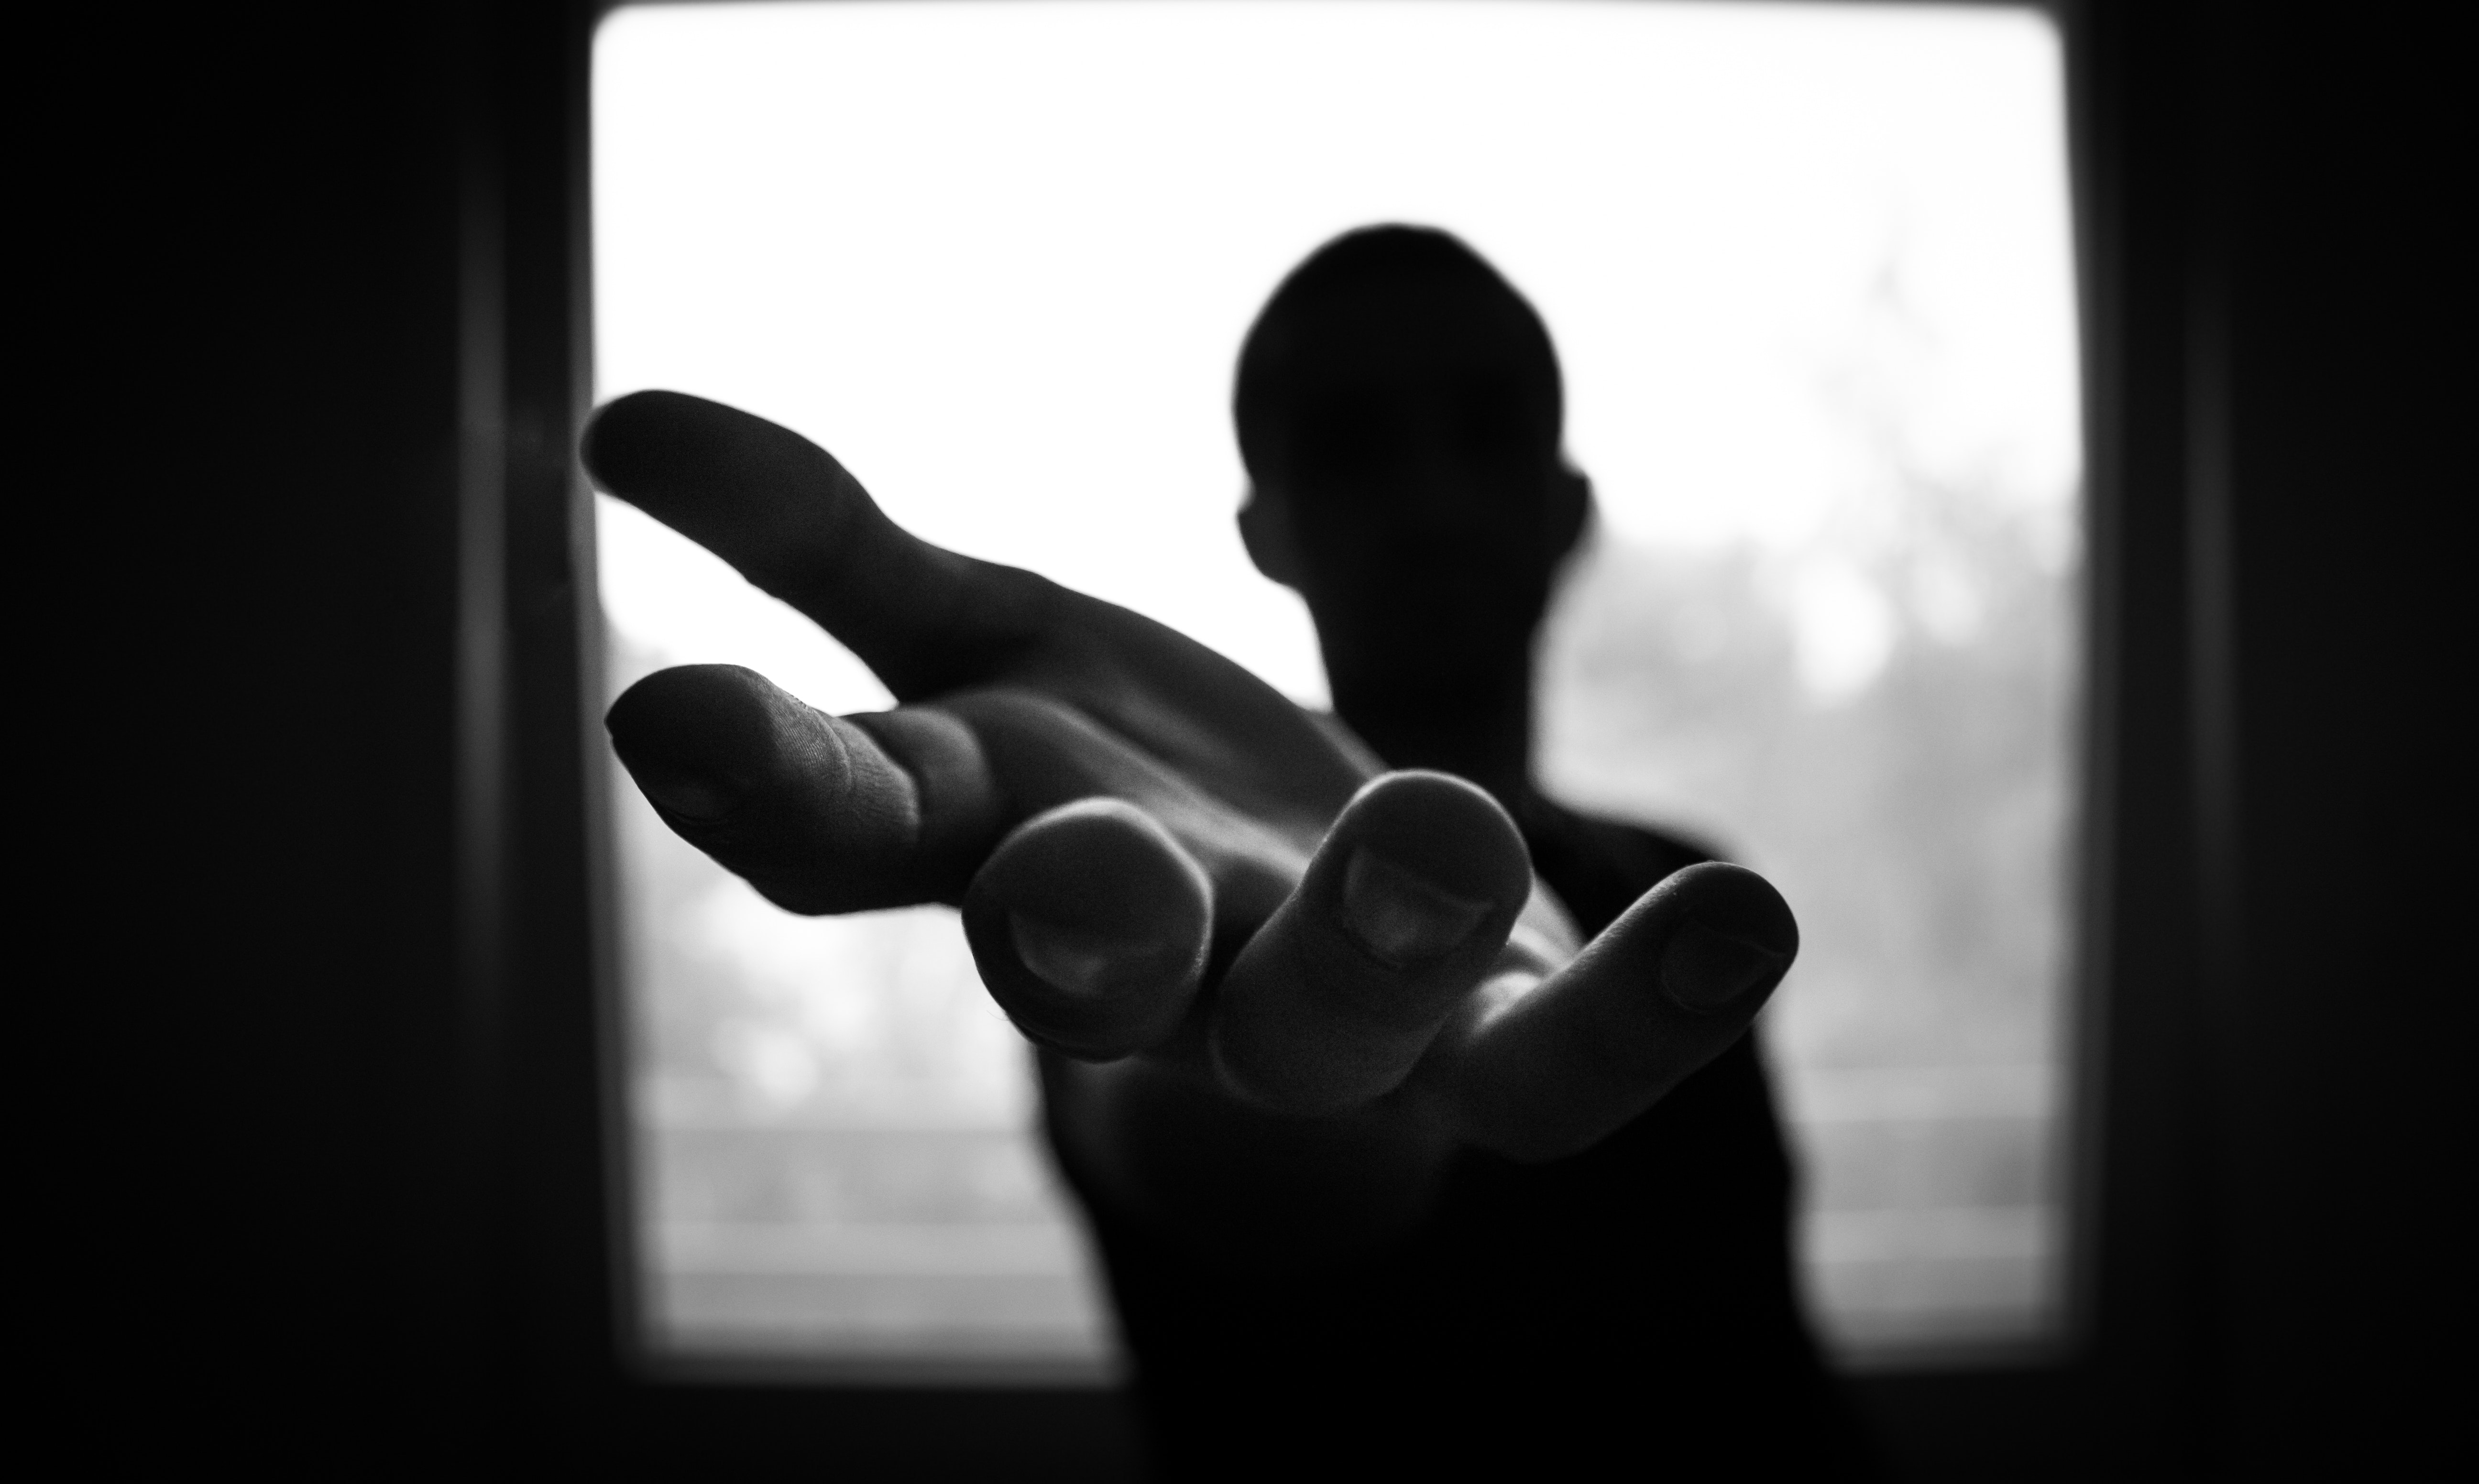 silhouette of person reaching out hand